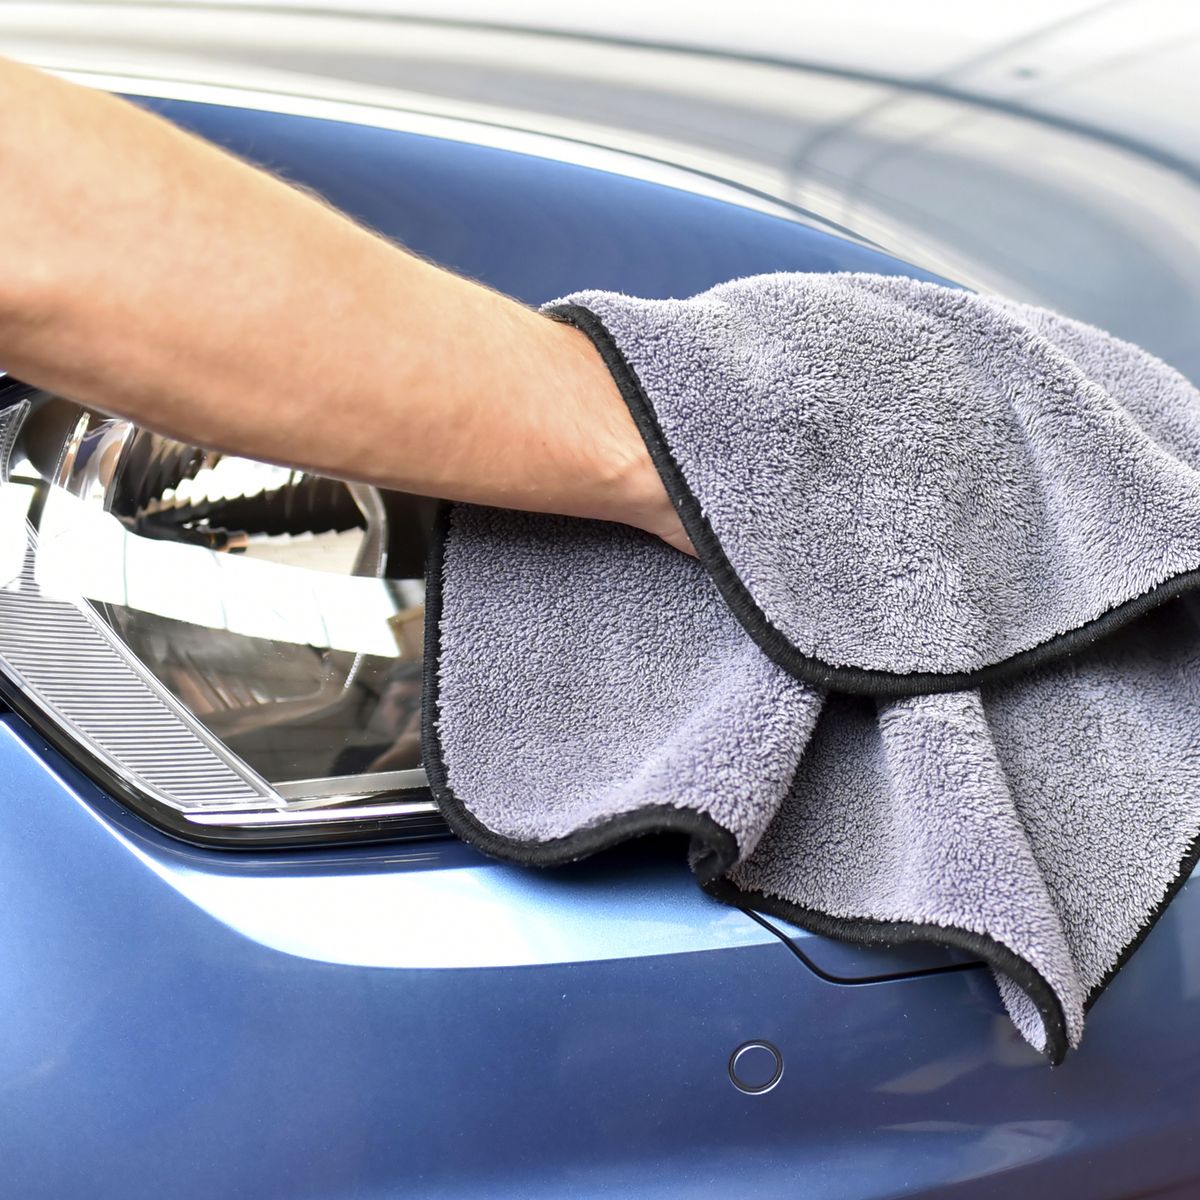 How To Clean Car Cover At Home - Do's And Dont's